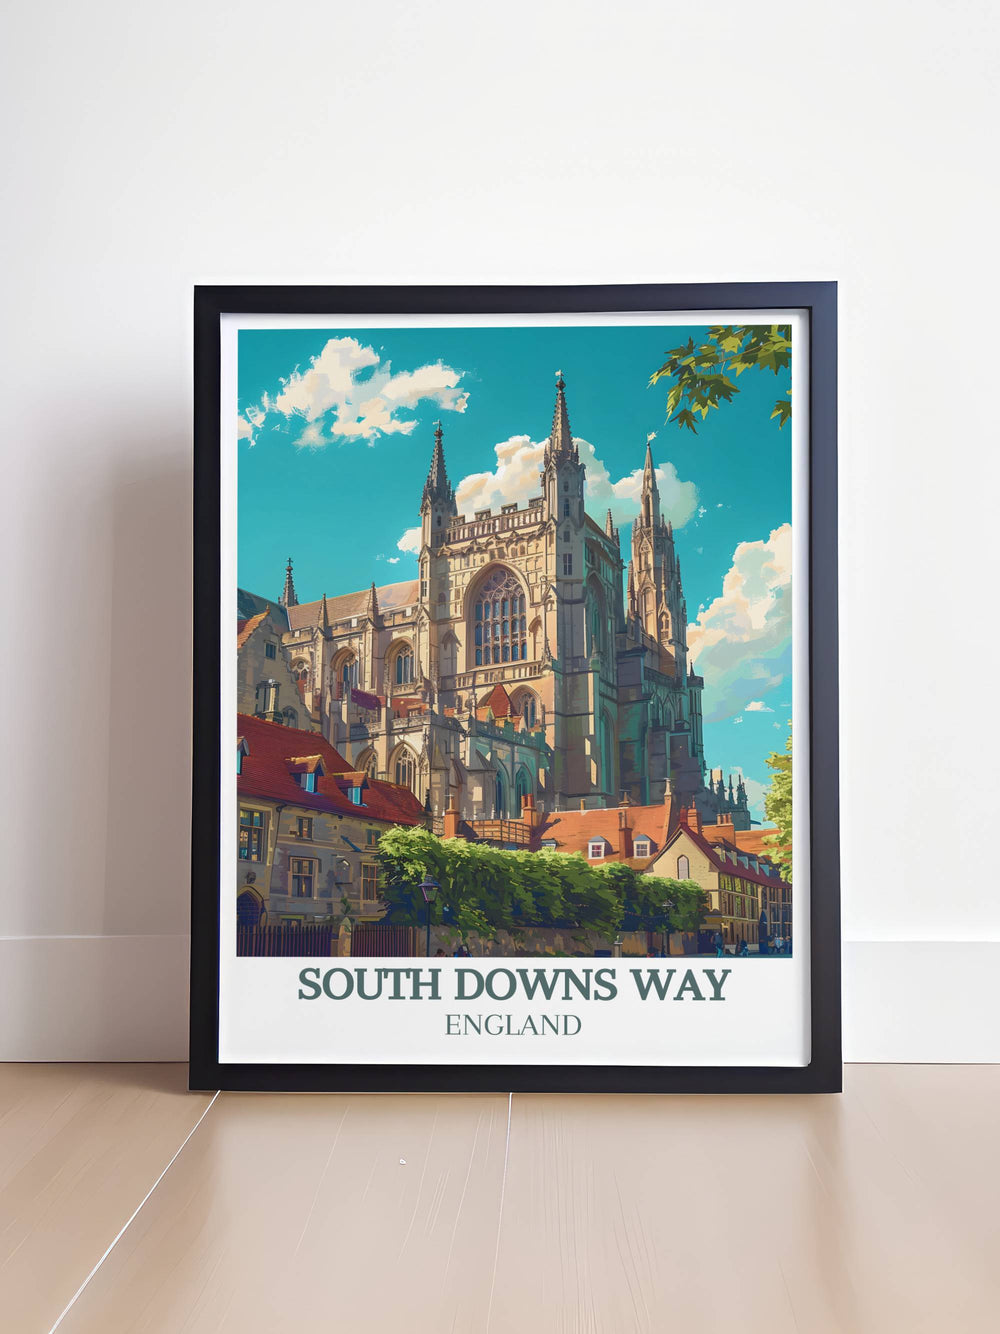 Vintage Sussex poster featuring the historic streets of Brighton and quaint villages of Eastbourne. Adds a touch of nostalgia and charm to any decor.